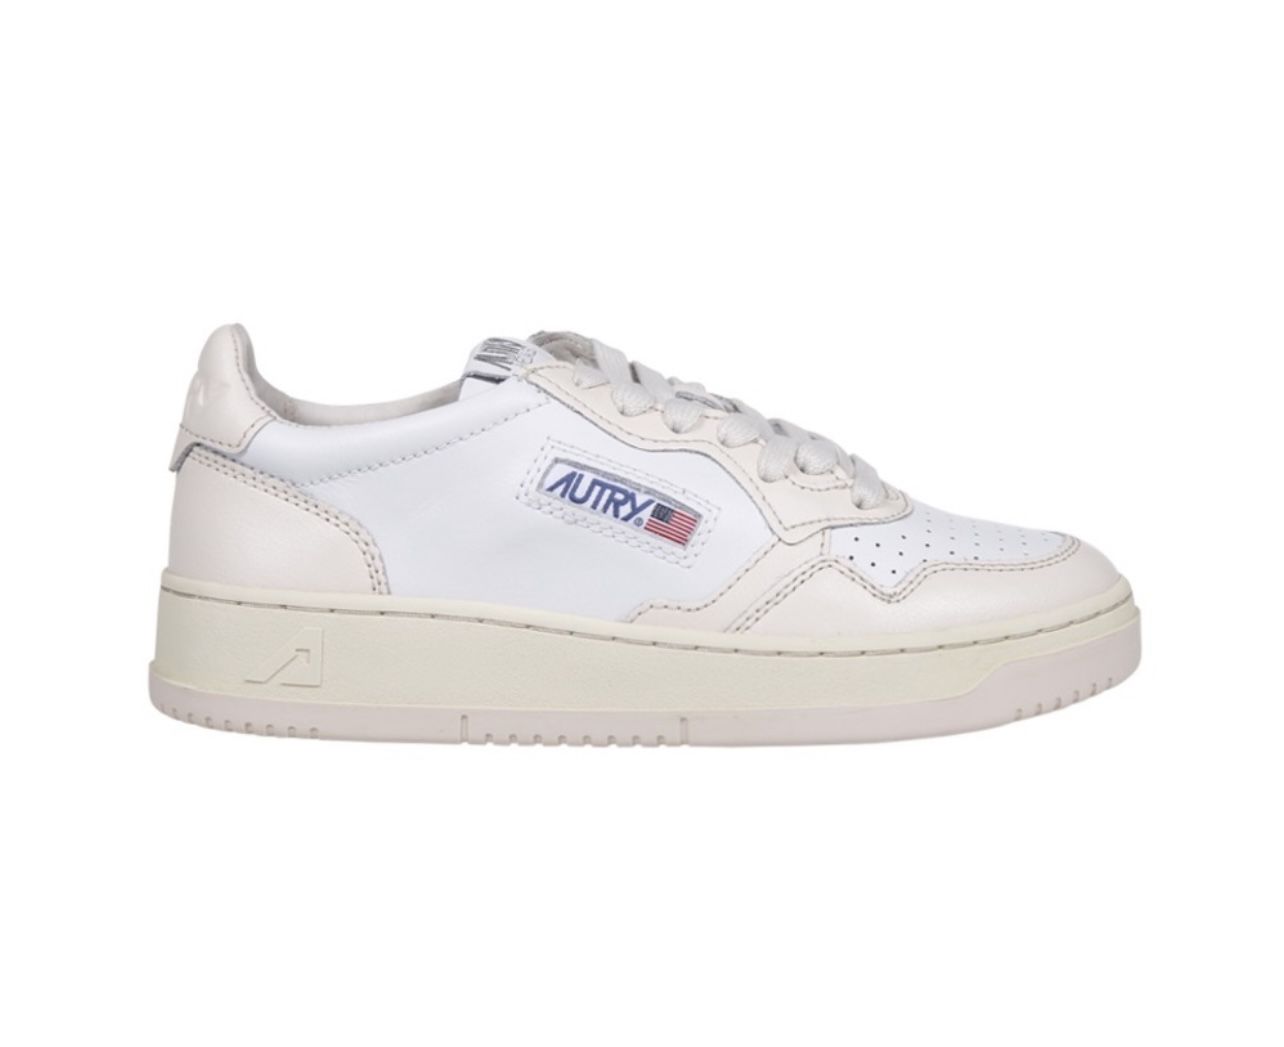 New Autry White Medalist Leather Low Sneaker In White/Powder Pink Sz. 6, EUR. 36